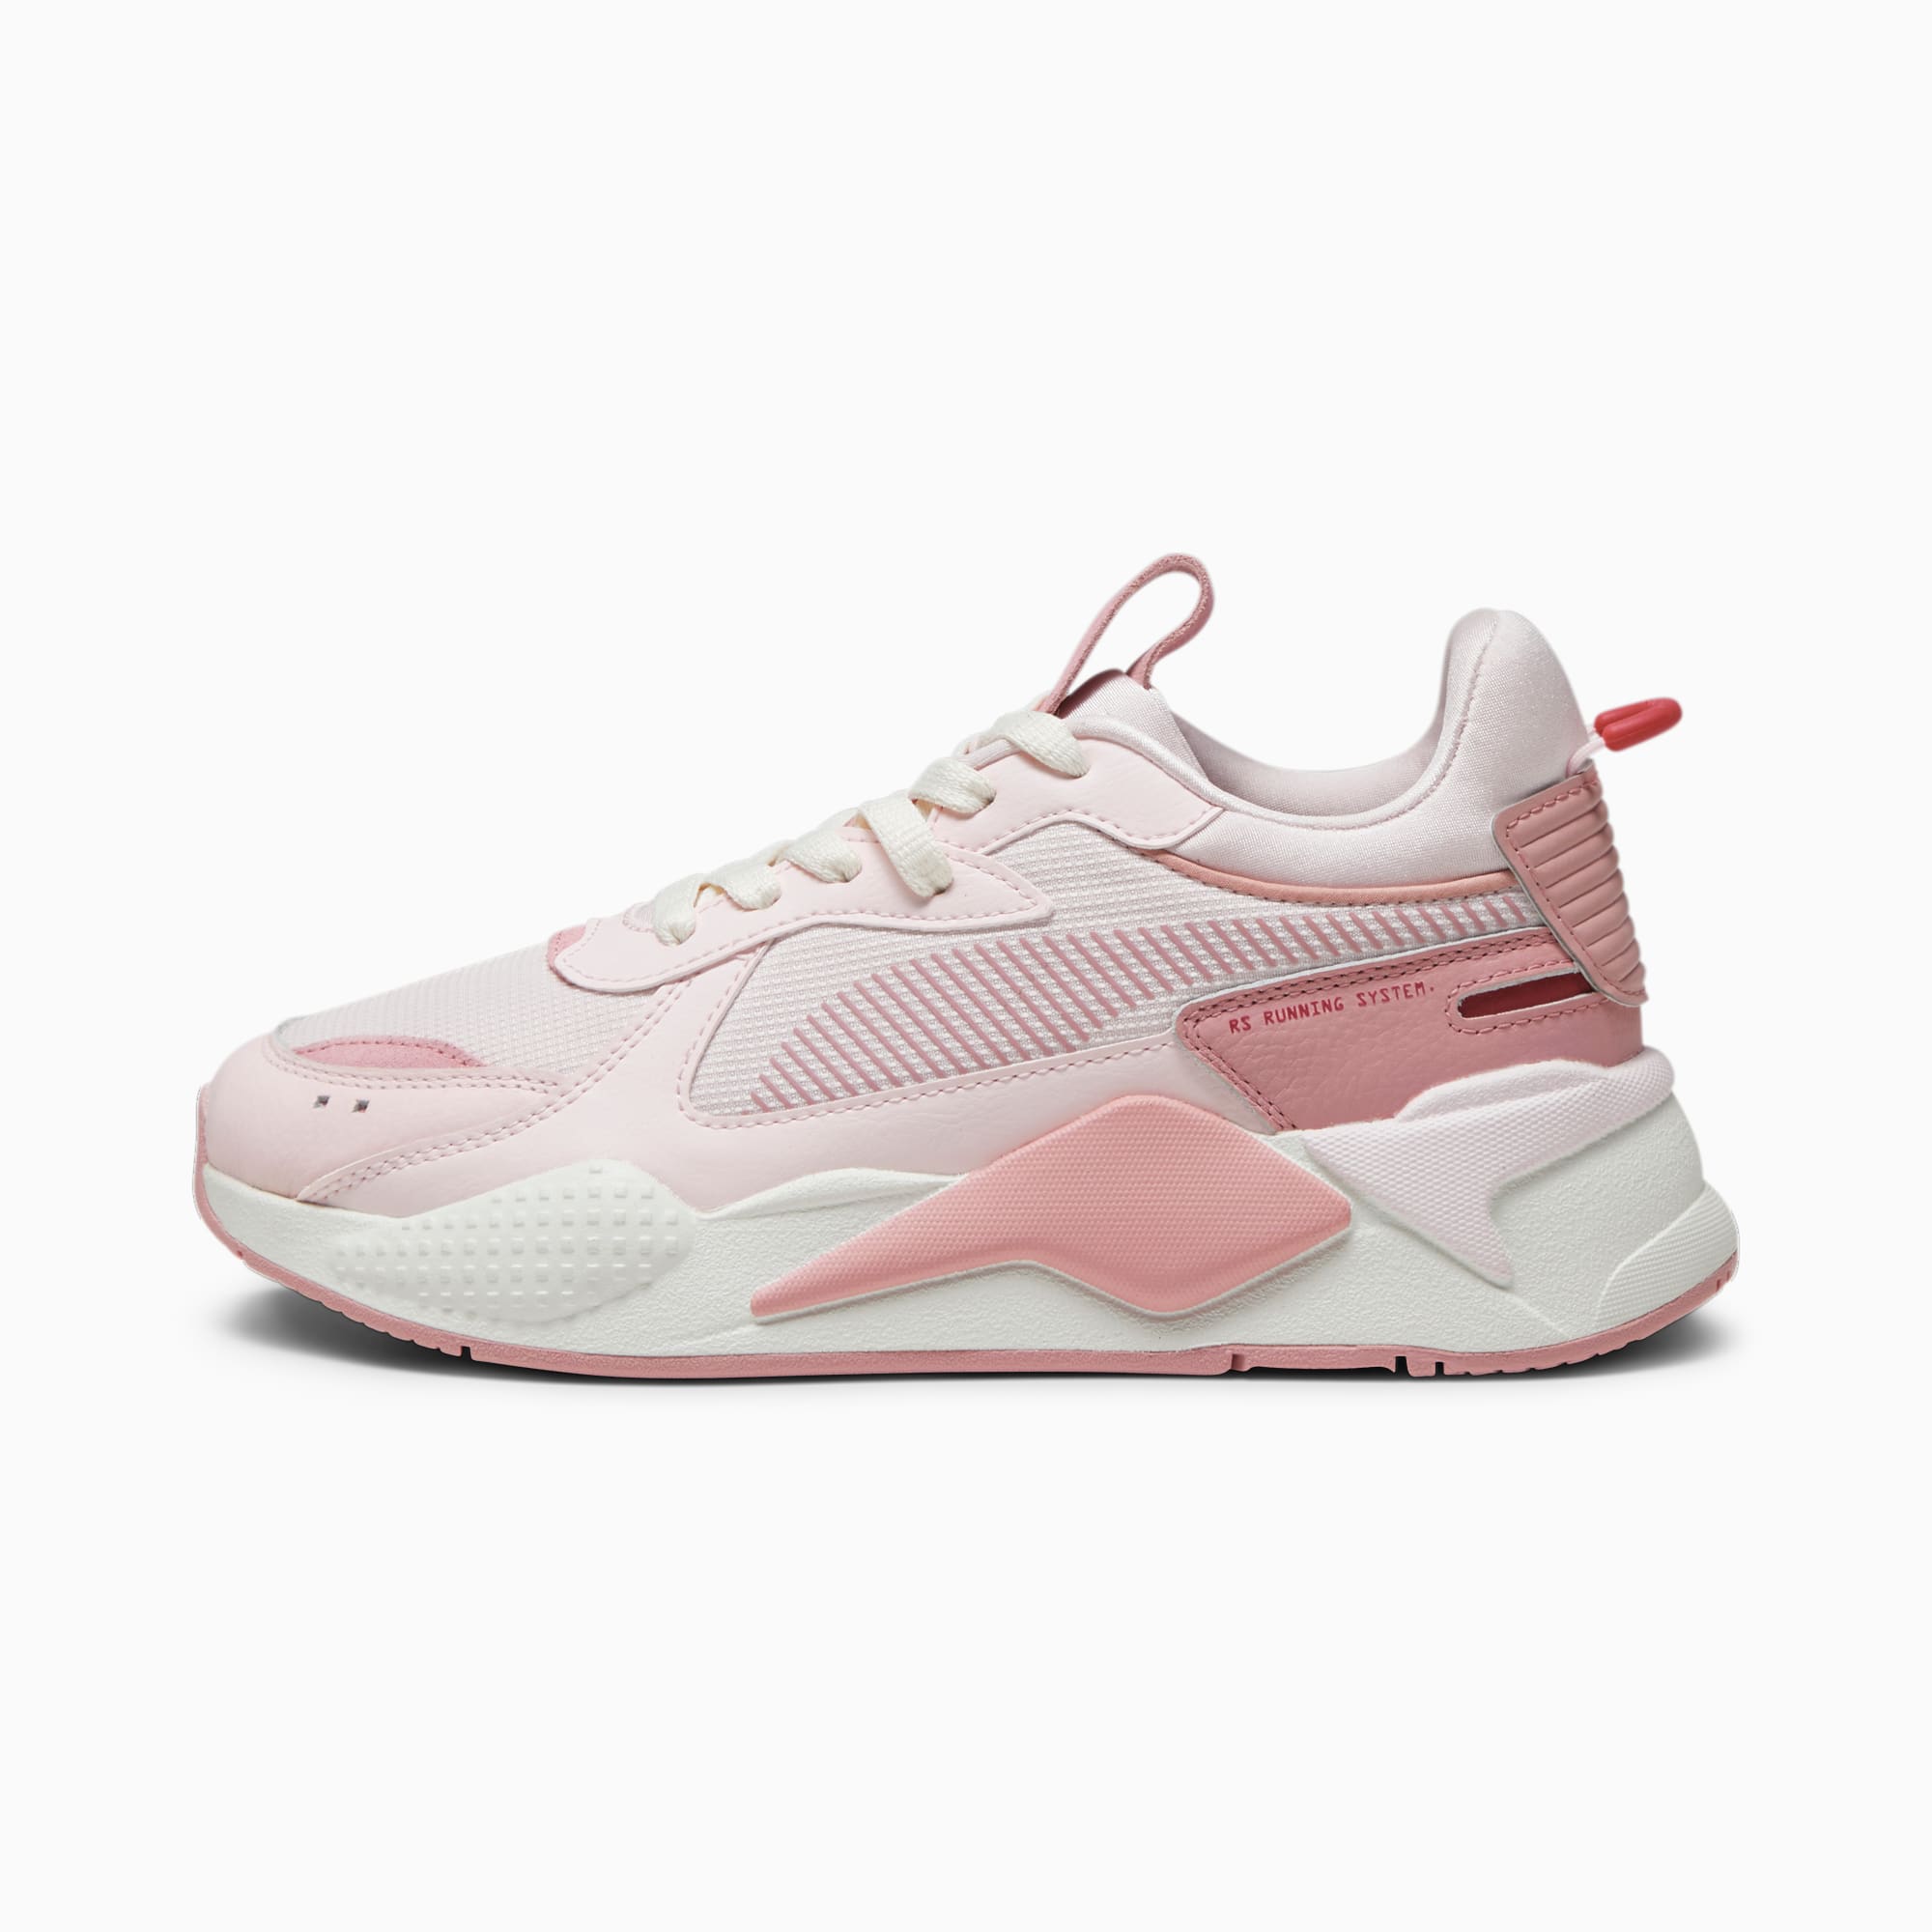 PUMA Rs-X Soft Women's Sneakers, Frosty Pink/Warm White